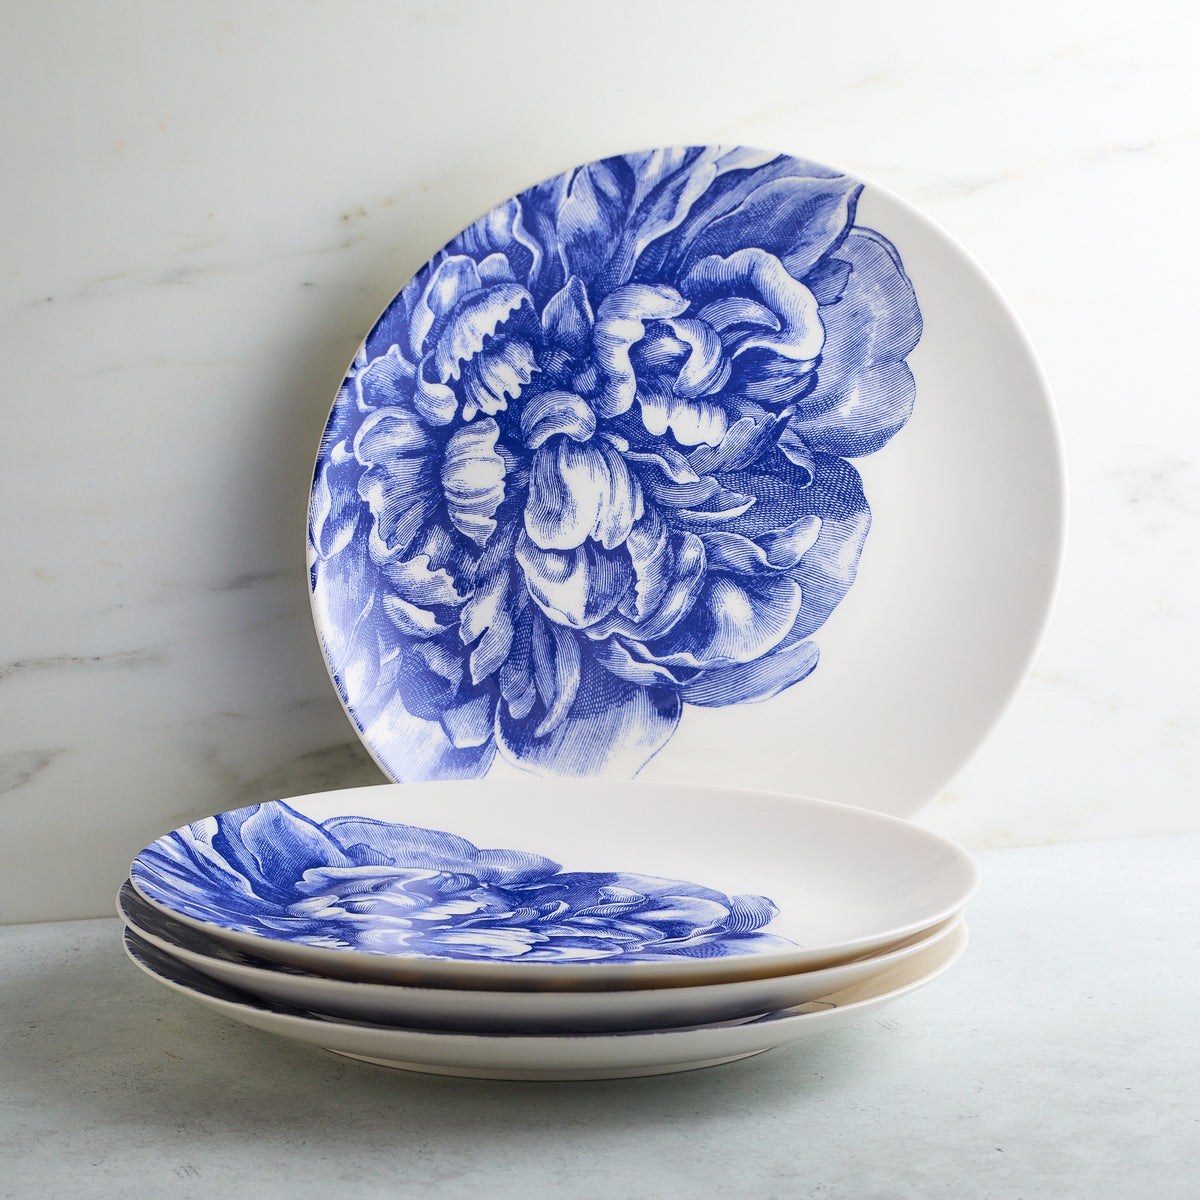 Two Peony Coupe Dinner Plates from Caskata Artisanal Home, one upright and one stacked, against a marble background.